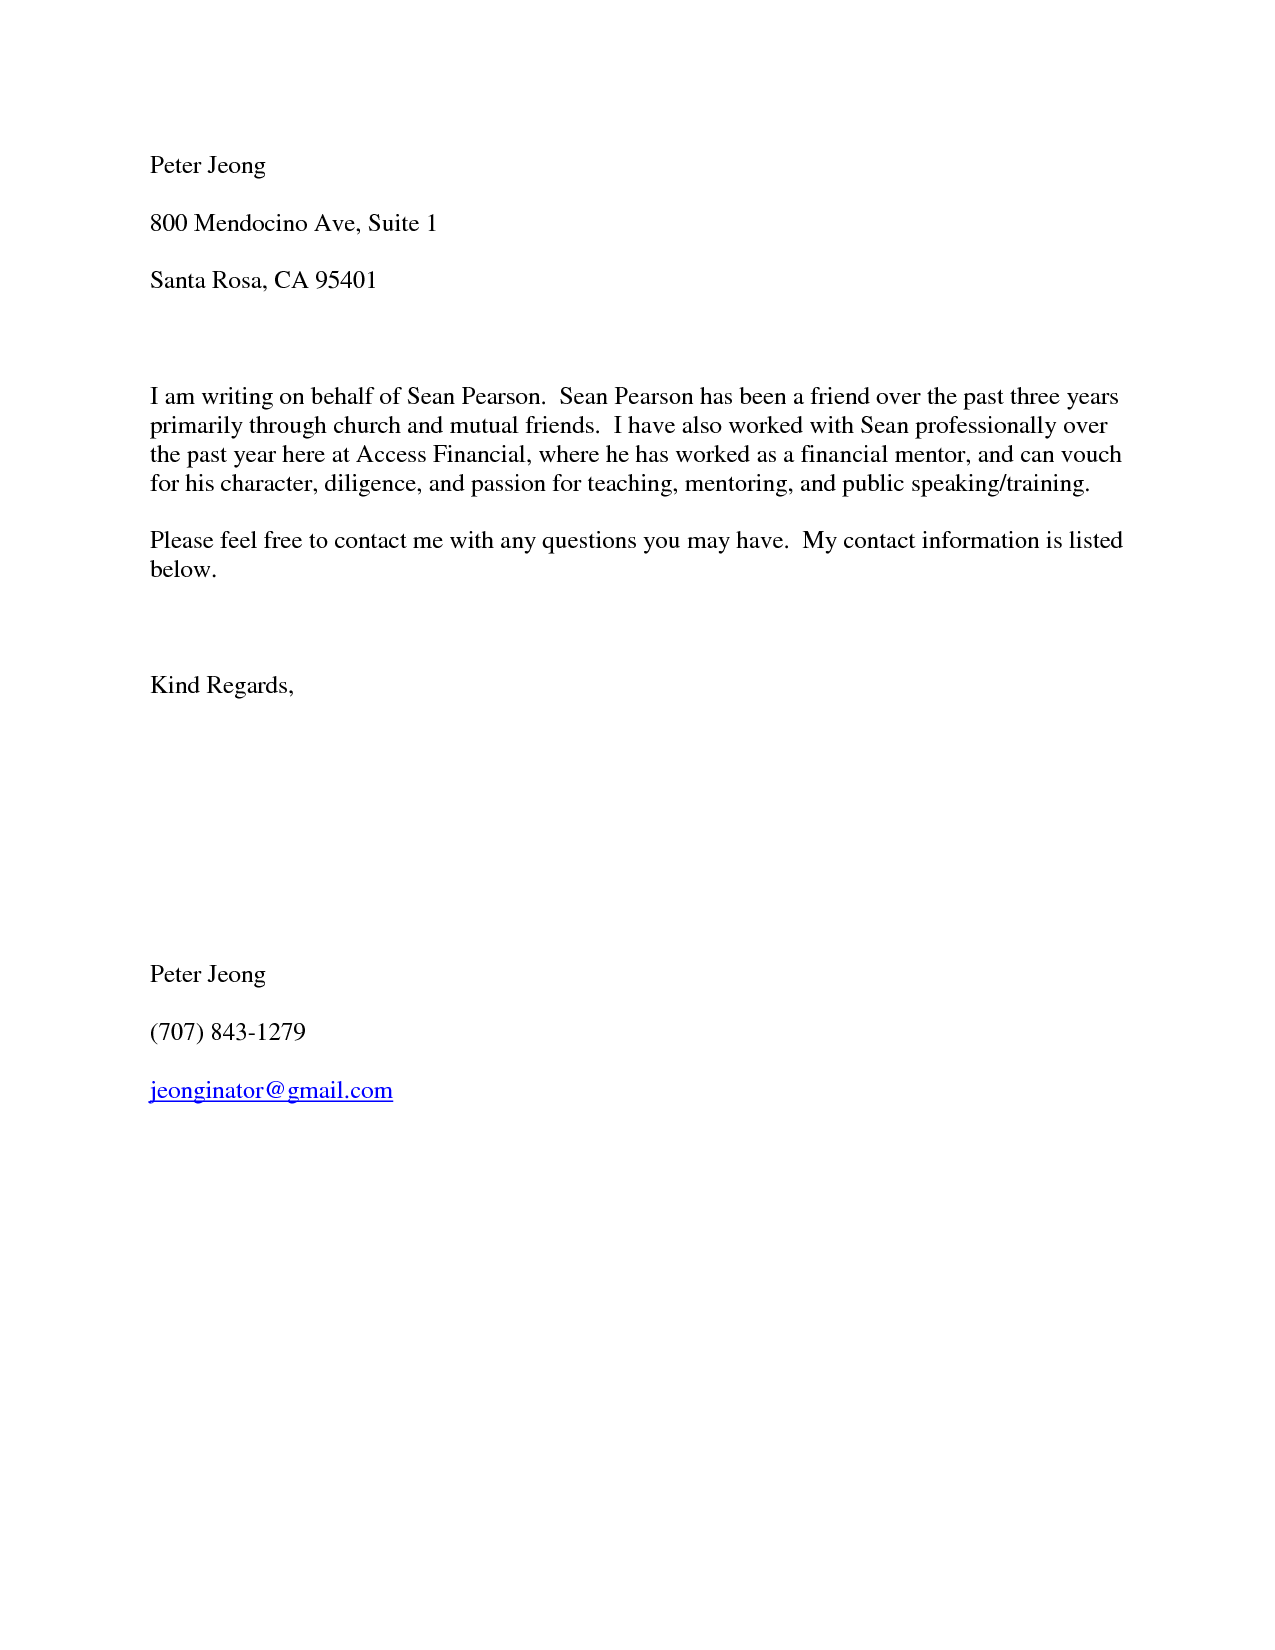 sample personal recommendation letter for a friend   Mini.mfagency.co